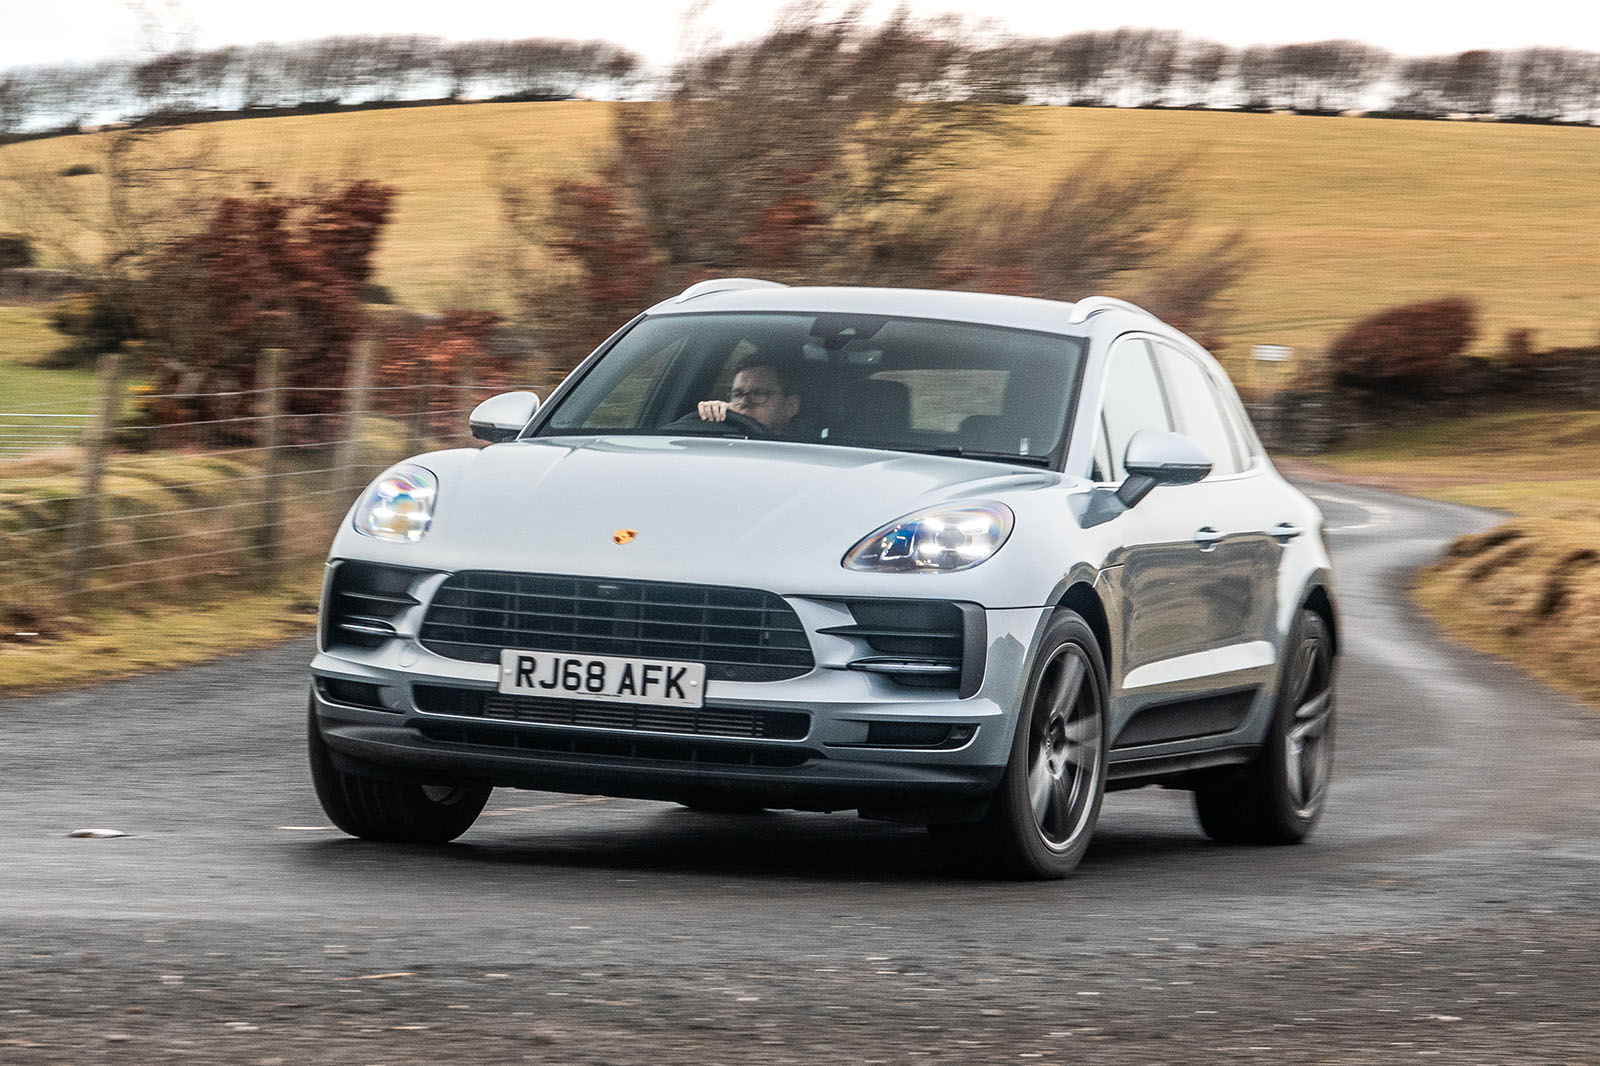 Porsche Macan to stay in UK as EU sales end